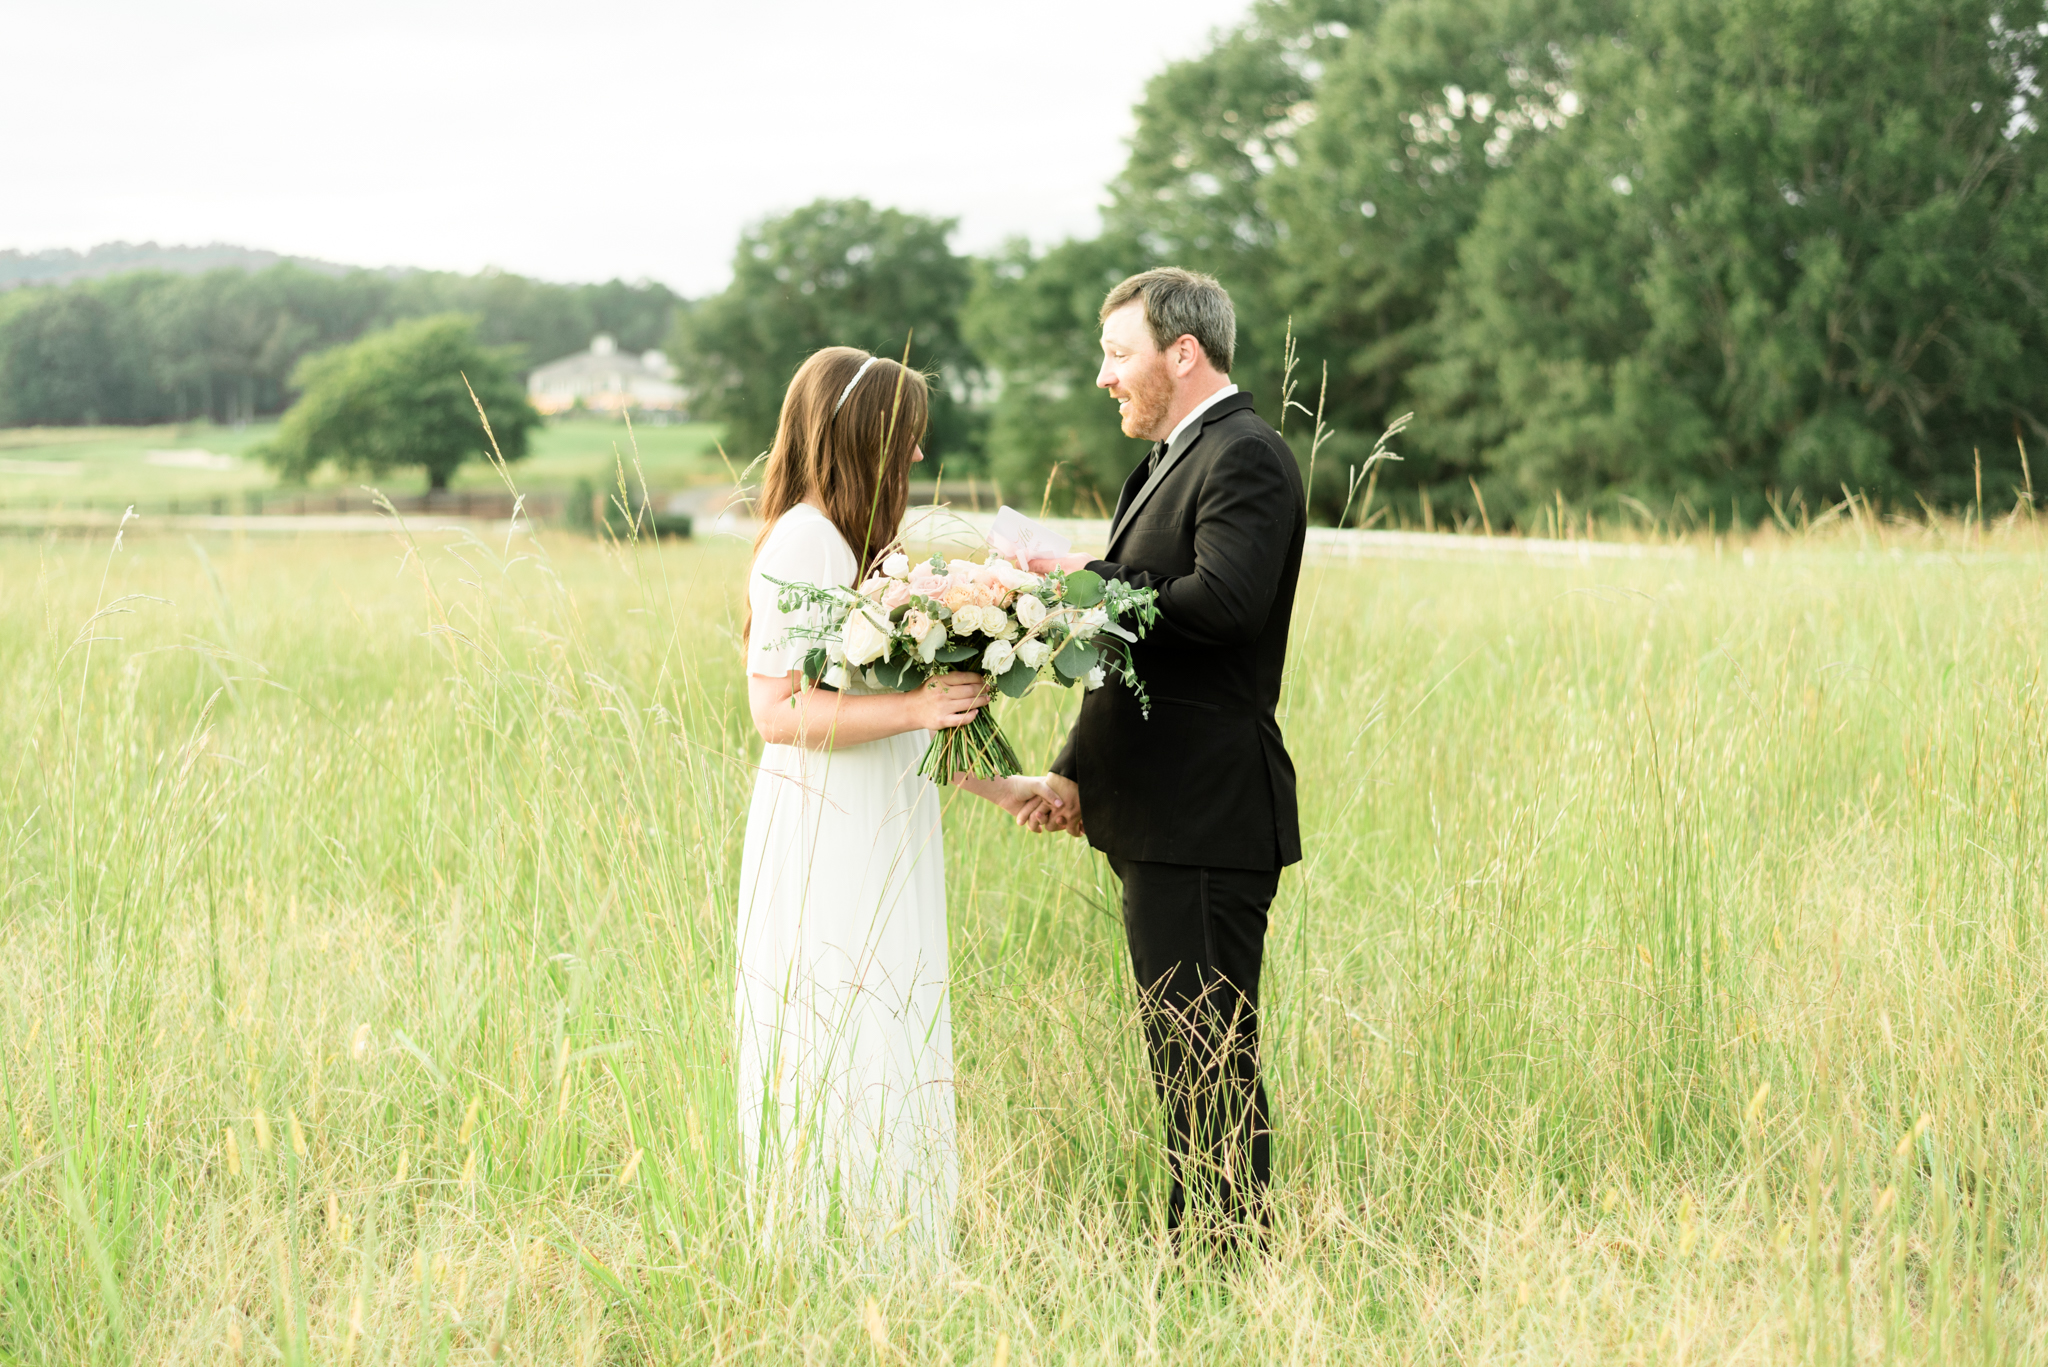 Husband and wife renew vows in field.